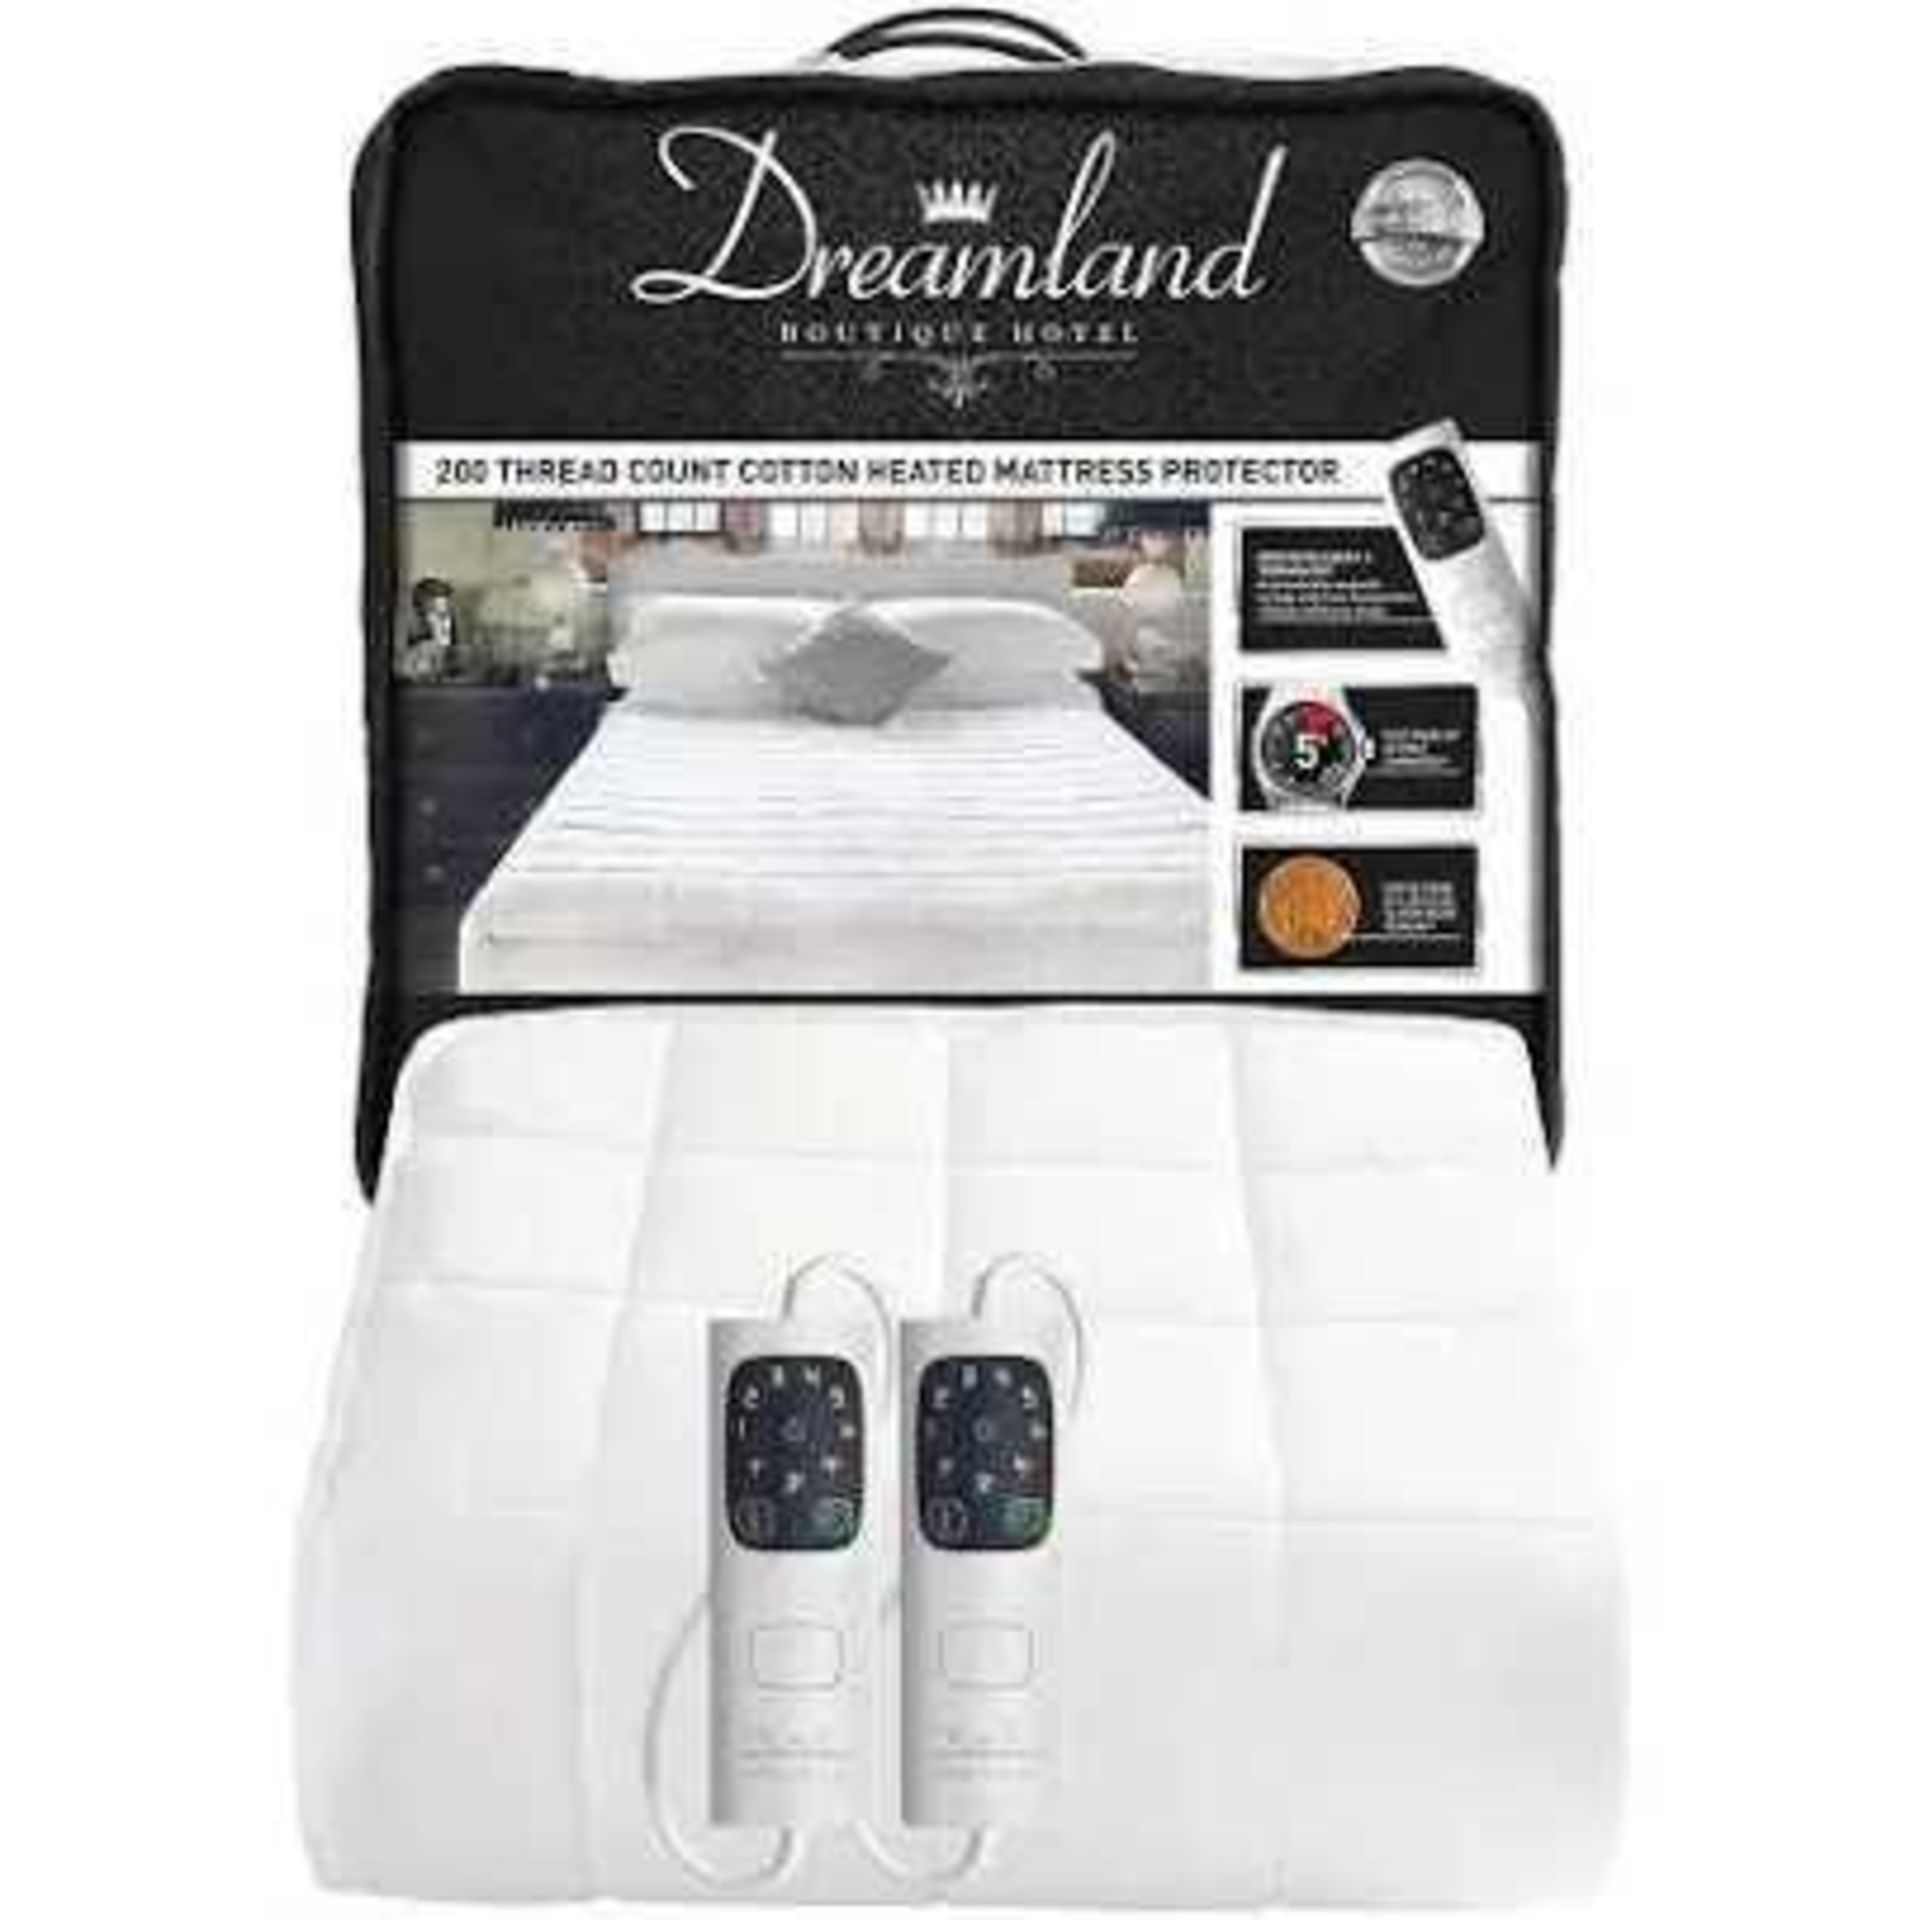 RRP £115 Bagged Dreamland Boutique Hotel 200X150Cm 200 Thread Count Cotton Heated Mattress Protector